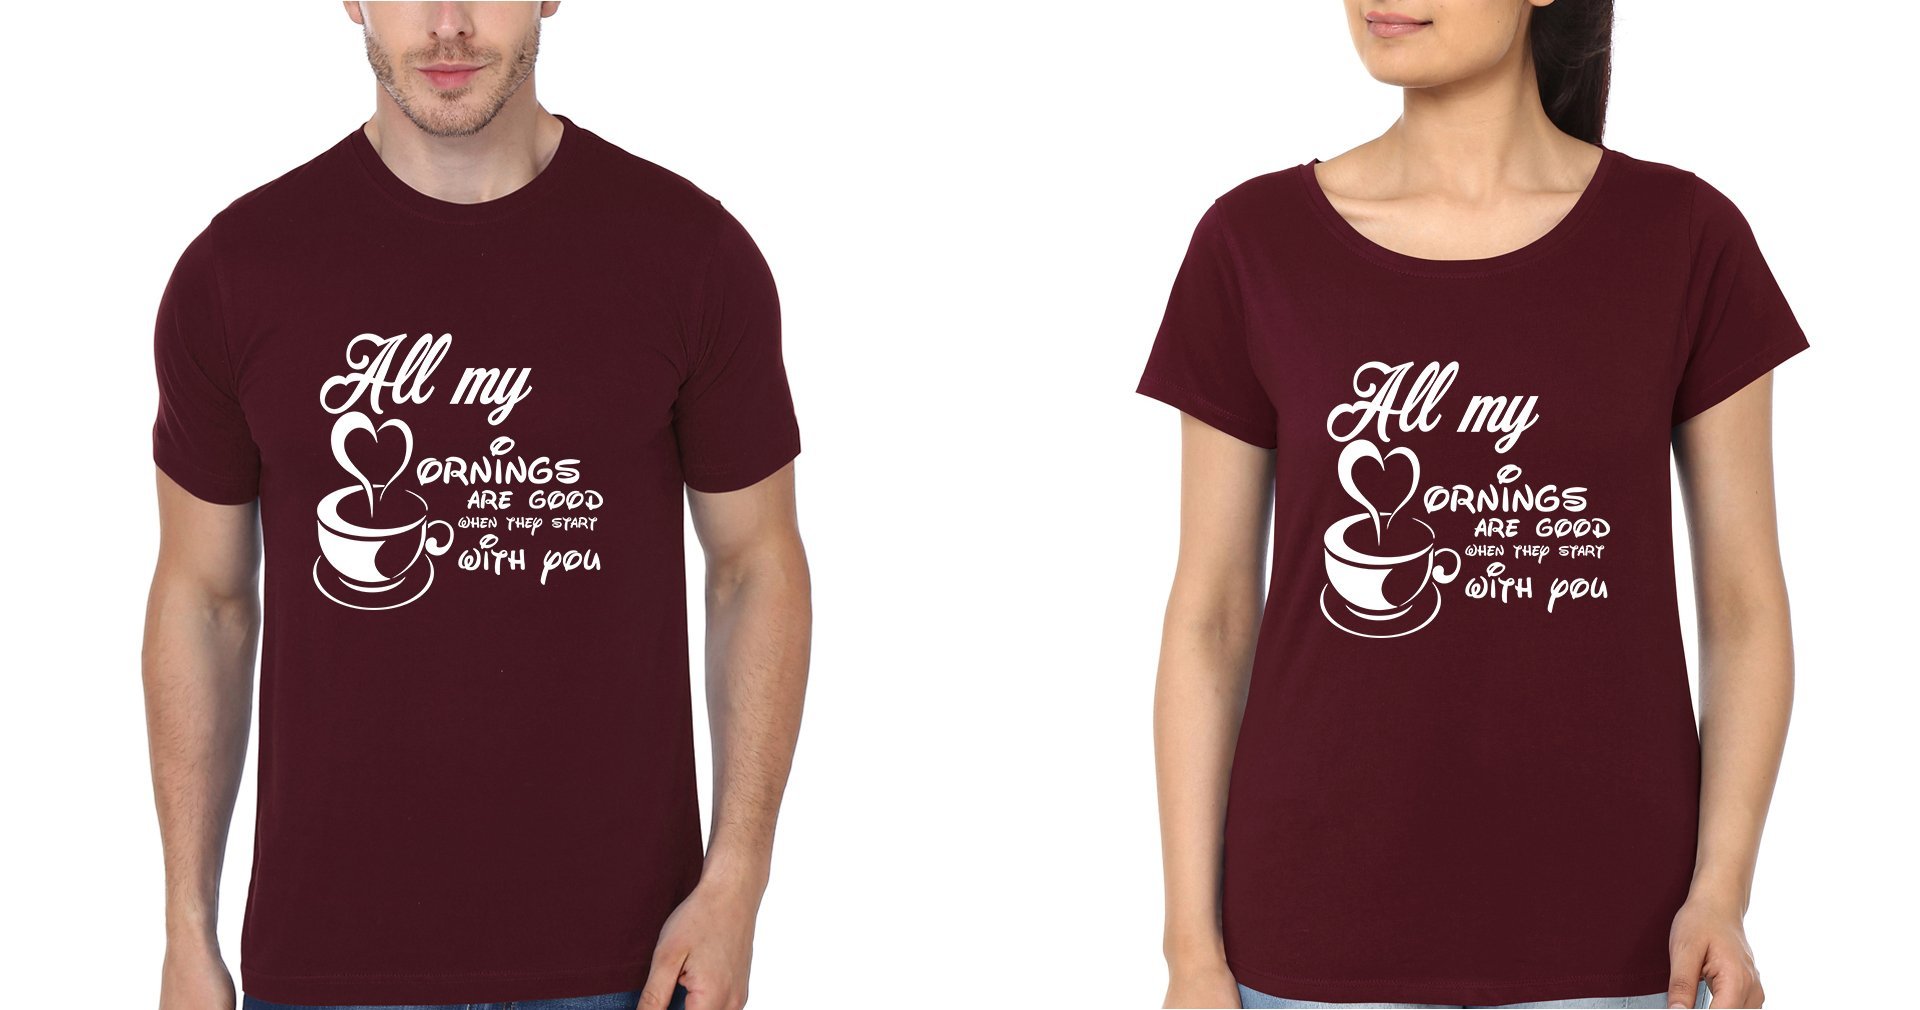 All My Mornings Are Good When They Starts With You Couple Half Sleeves T-Shirts -FunkyTees - Funky Tees Club